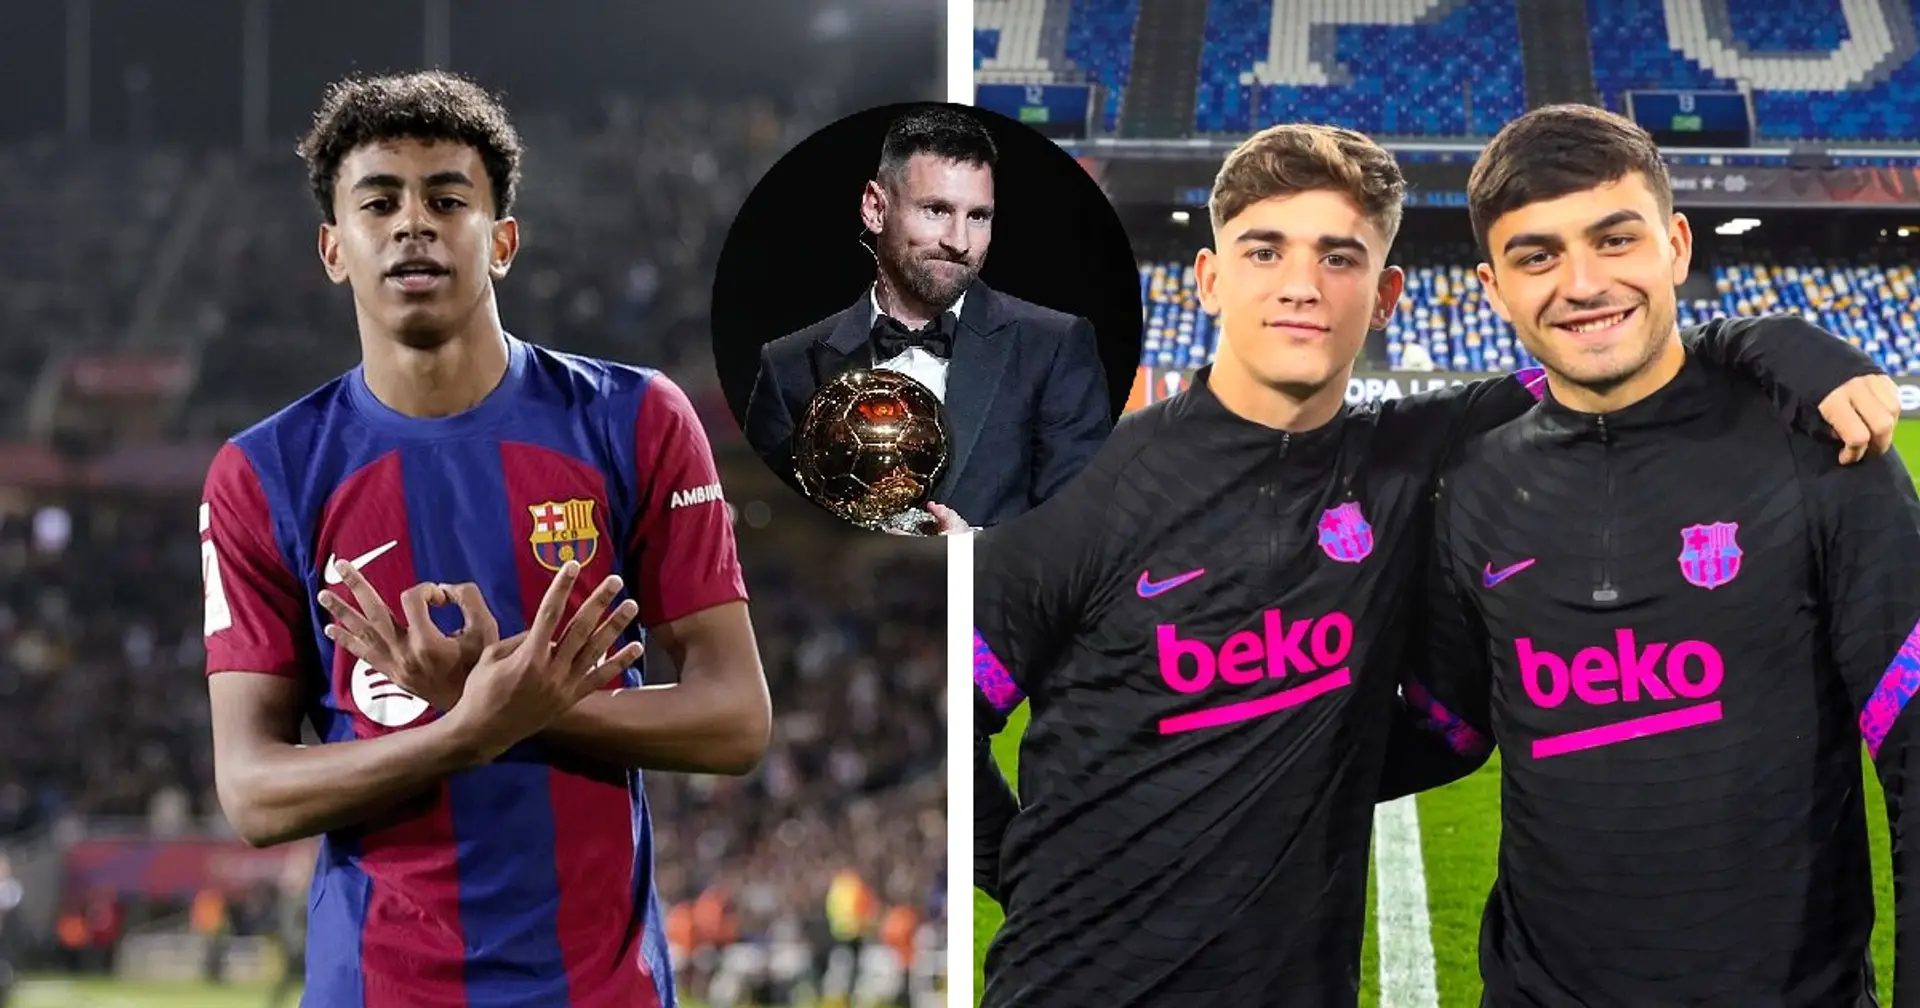 Messi names 4 potential Ballon d'Or winners - ONE plays for Barca